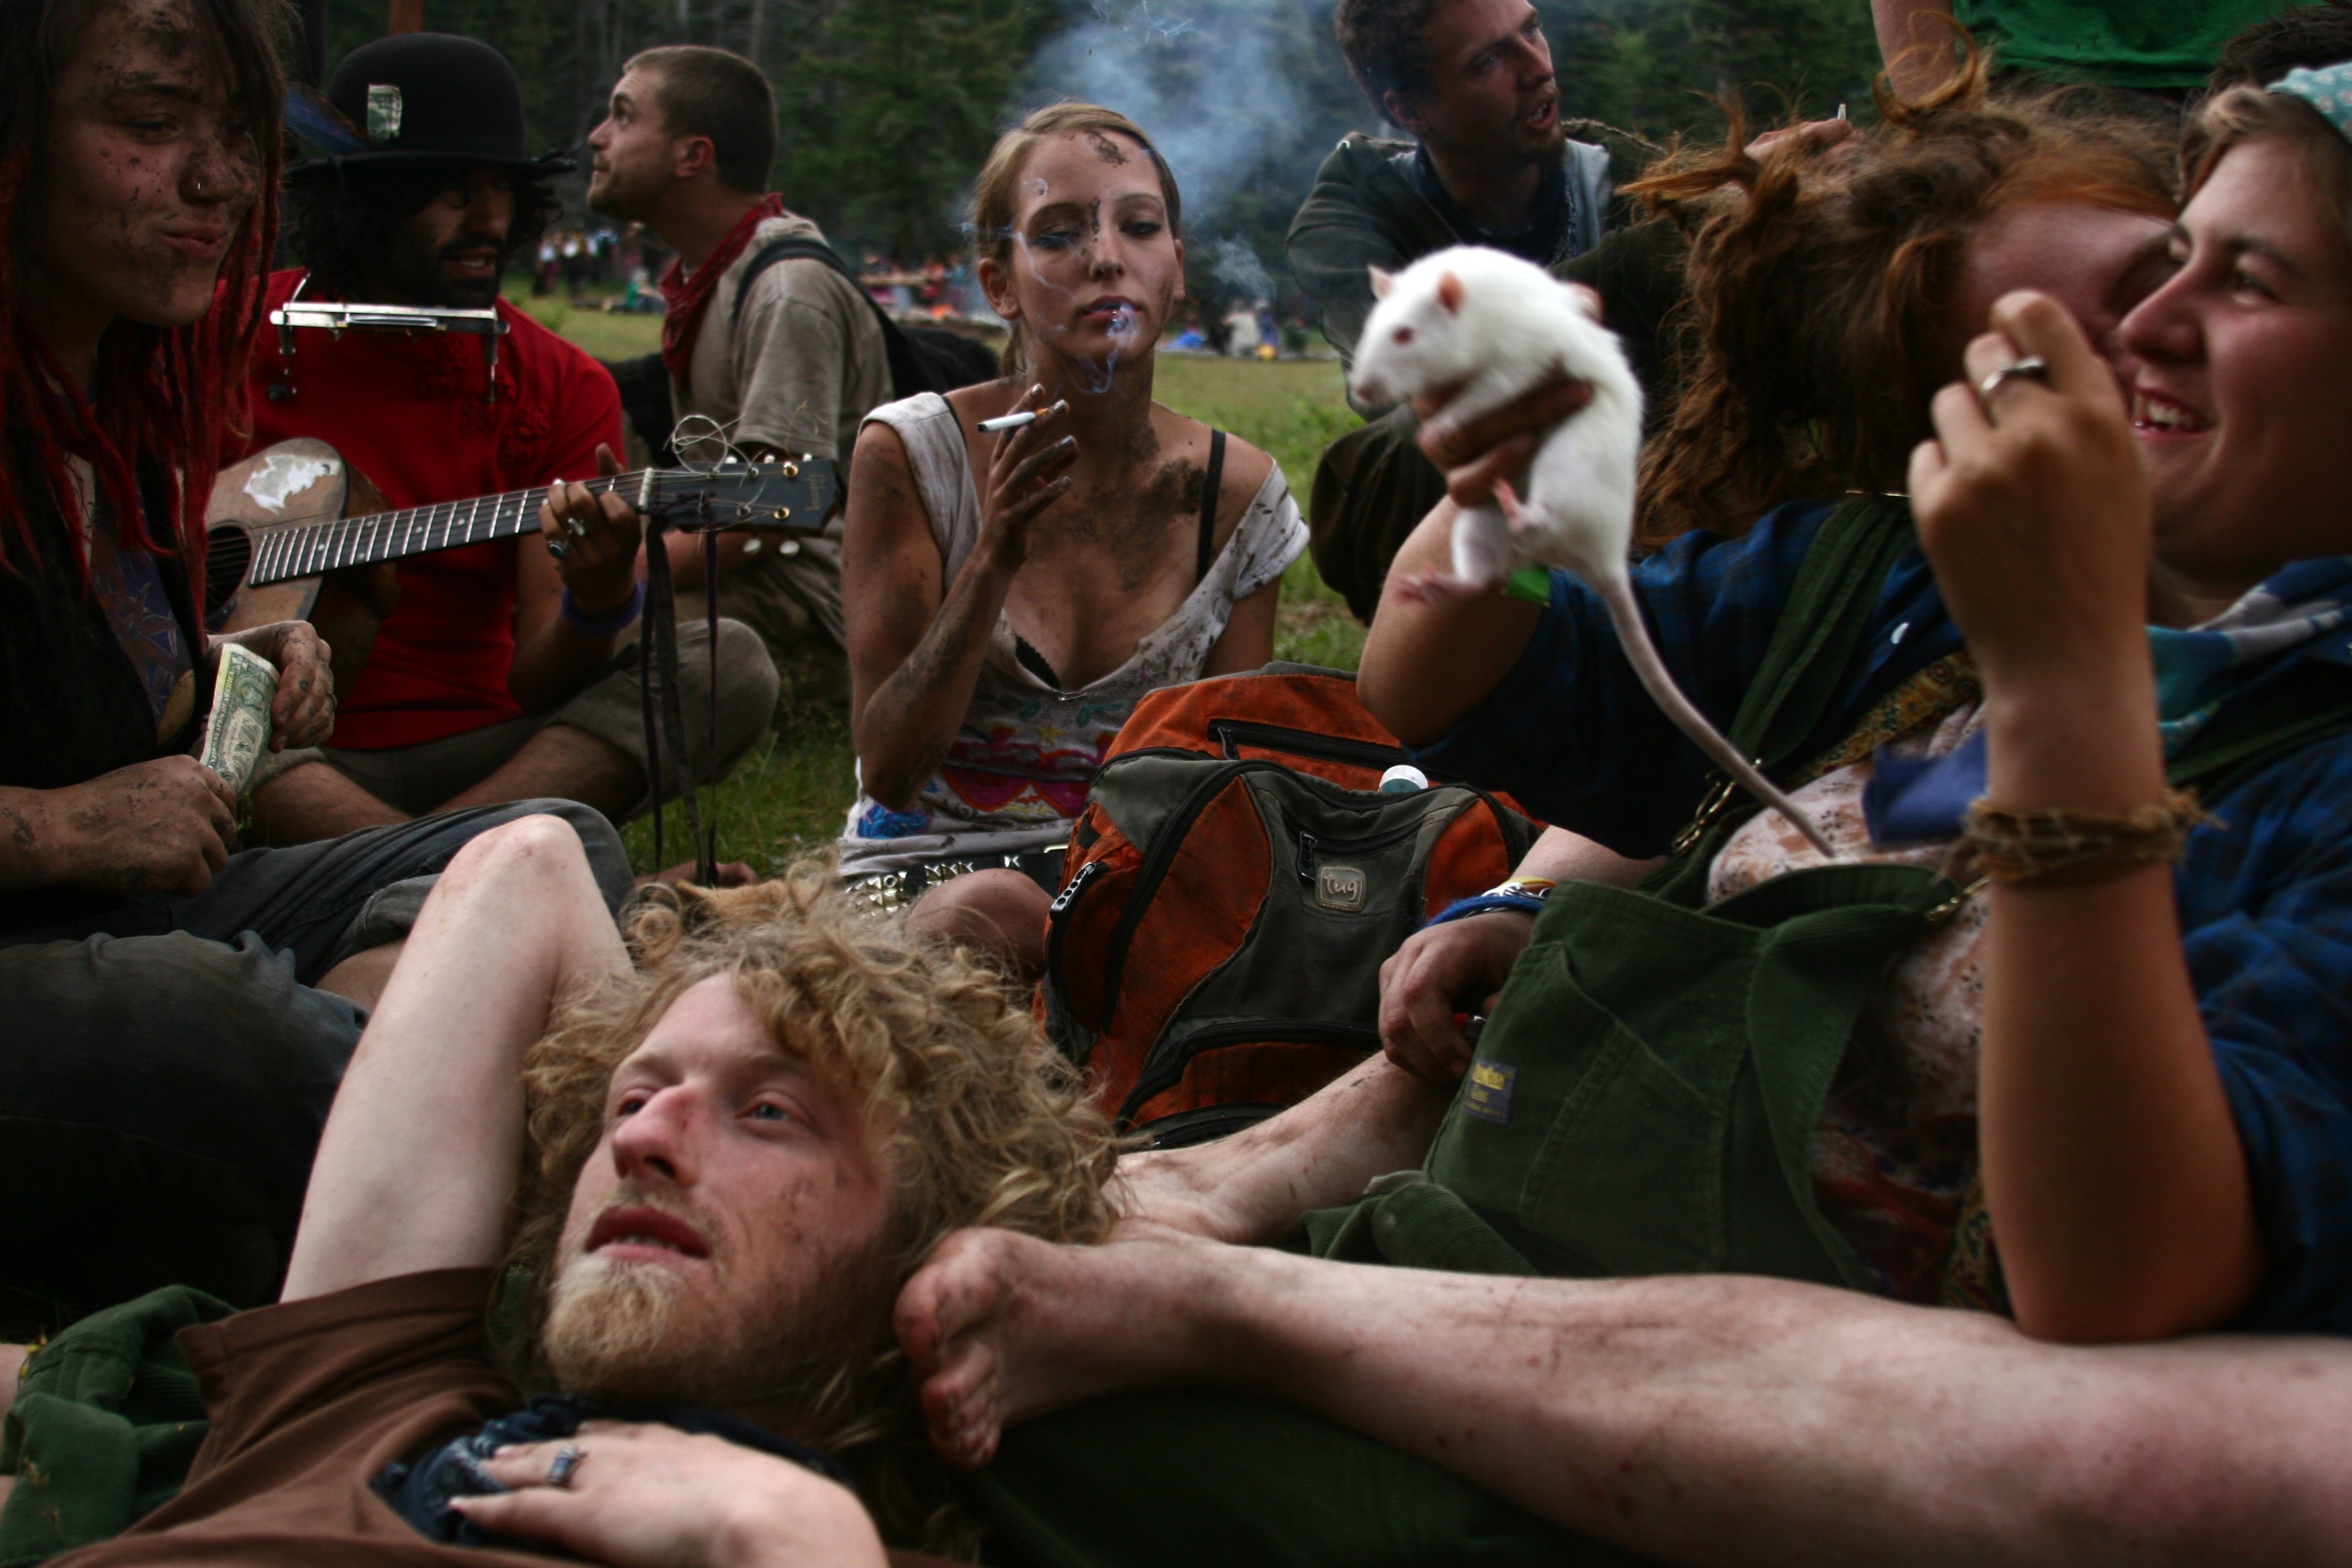 Young nomads congregate at the "Dirty Kids Corner" at the National Rainbow Gathering in the Santa Fe National Forest, New Mexico. July 2009. Photo: Kitra Cahana